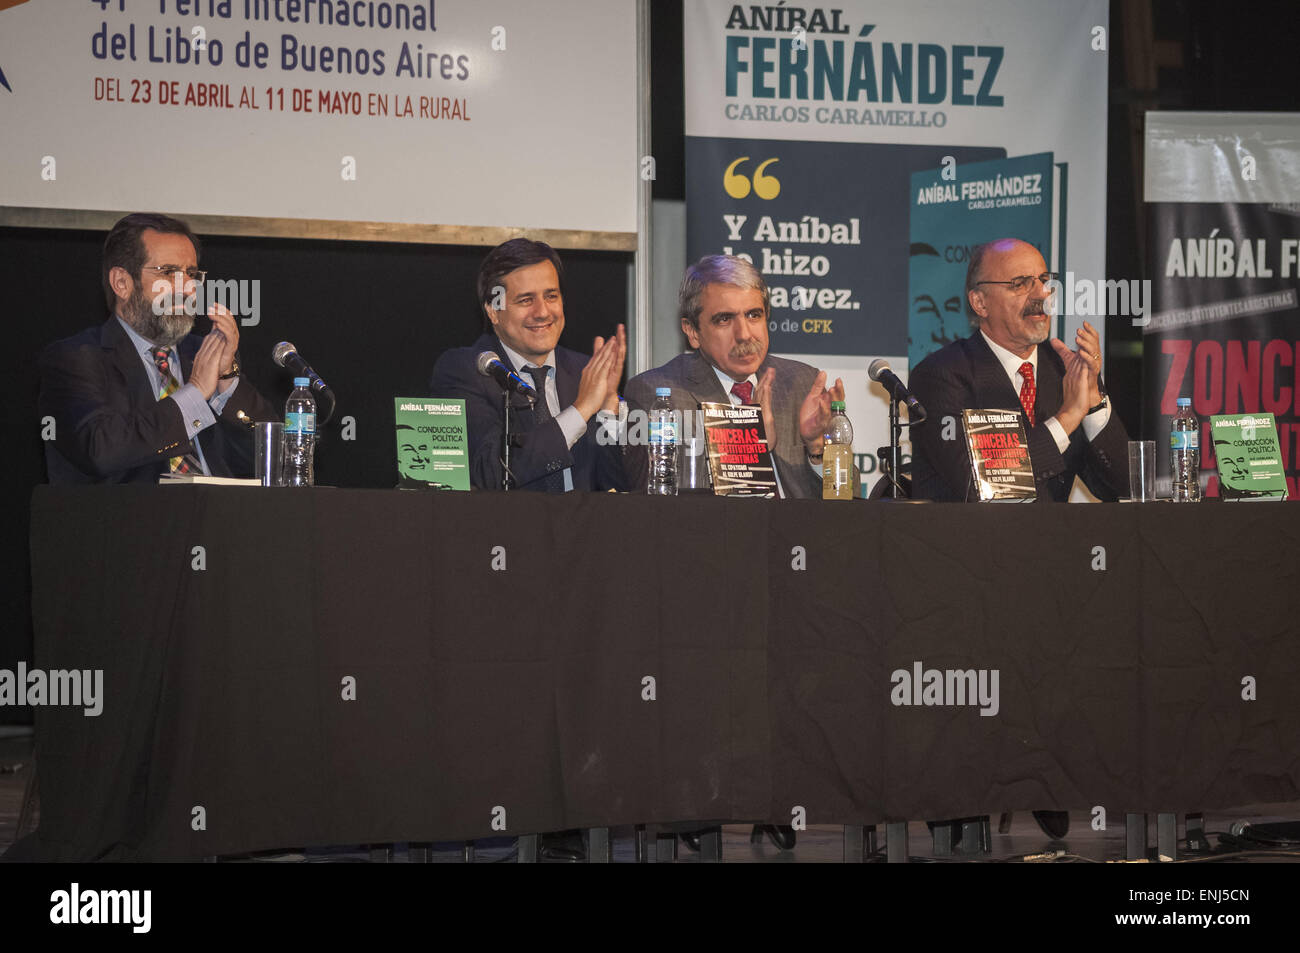 Buenos Aires, Buenos Aires, Argentina. 5th May, 2015. Writer Carlos Caramello, Aerolineas Argentinas president and candidate to Major Mariano Recalde, Chief of Cabinet Anibal Fernandez and Ministry of Labour Carlos tomada during the presentation of Fernandez and Caramello's new book ''Conduccion politica. Asi hablaba Juan Peron'' (Political management. So spoke Juan Peron), a book that deals with the politics of historic Argentinian leader Juan Peron. © Patricio Murphy/ZUMA Wire/Alamy Live News Stock Photo